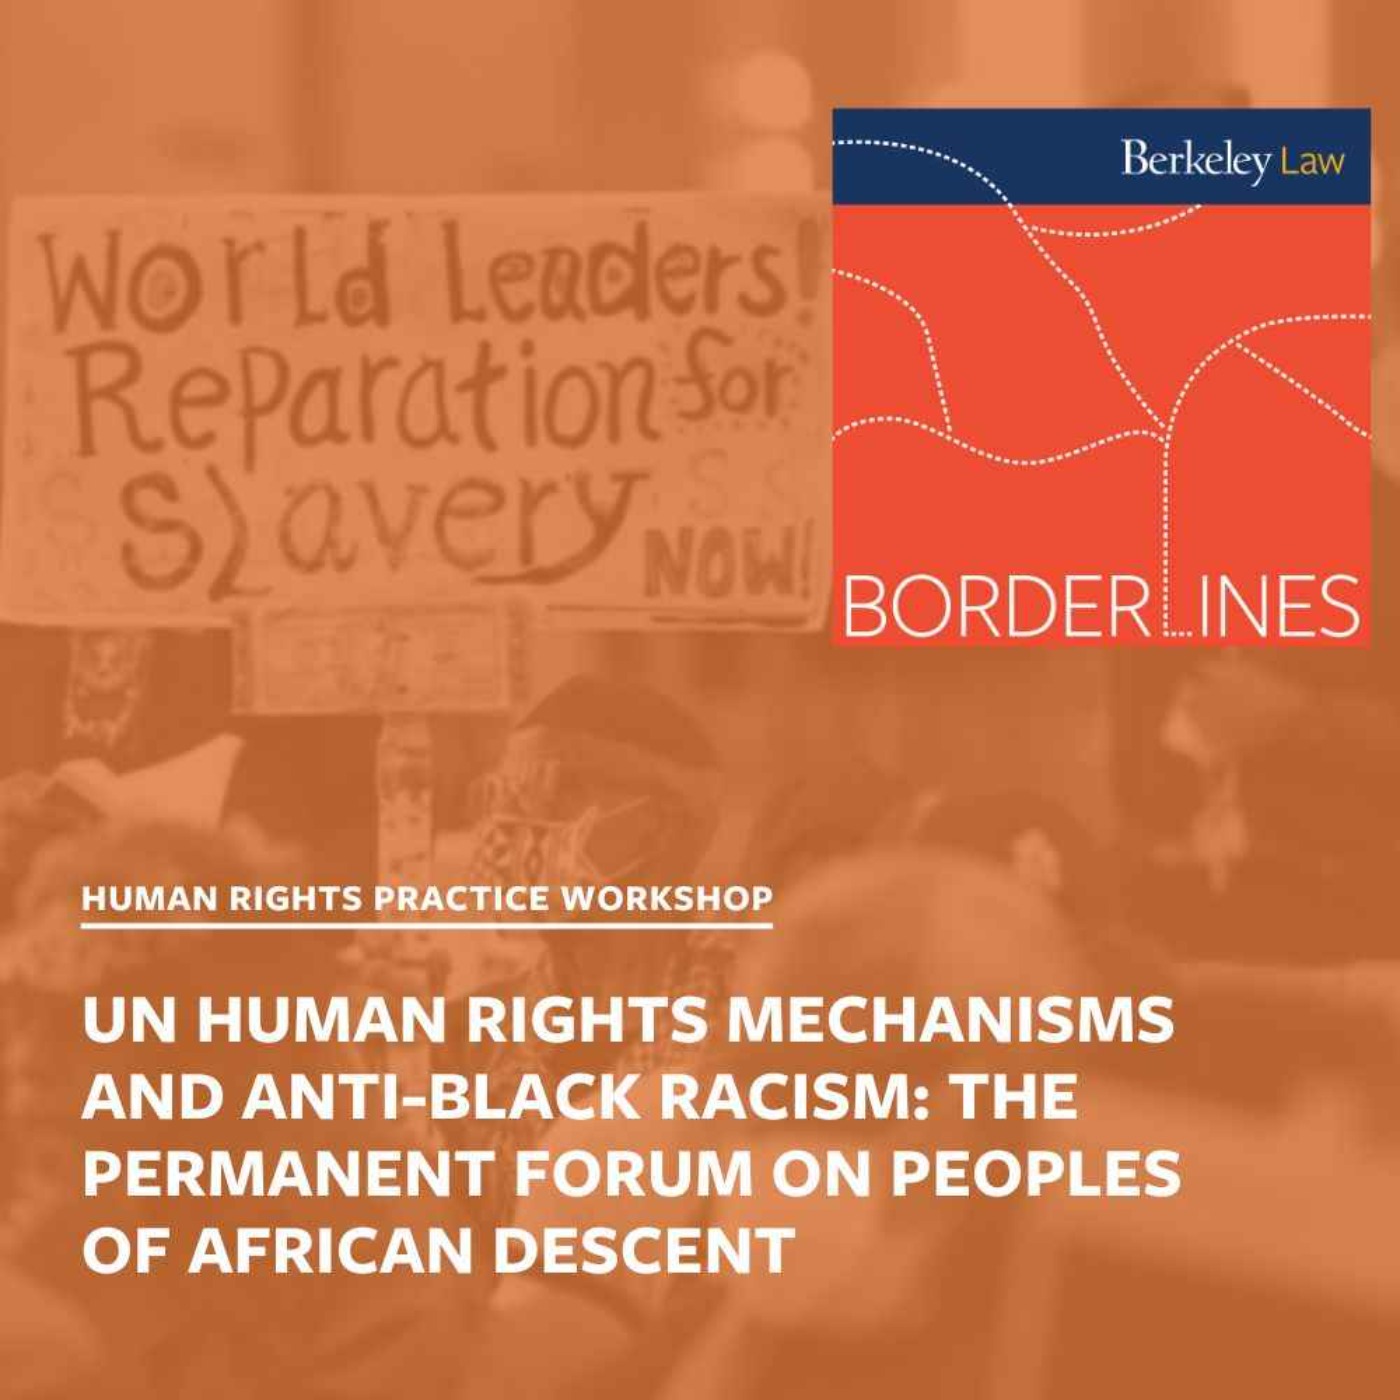 UN Human Rights Mechanisms and Anti-Black Racism